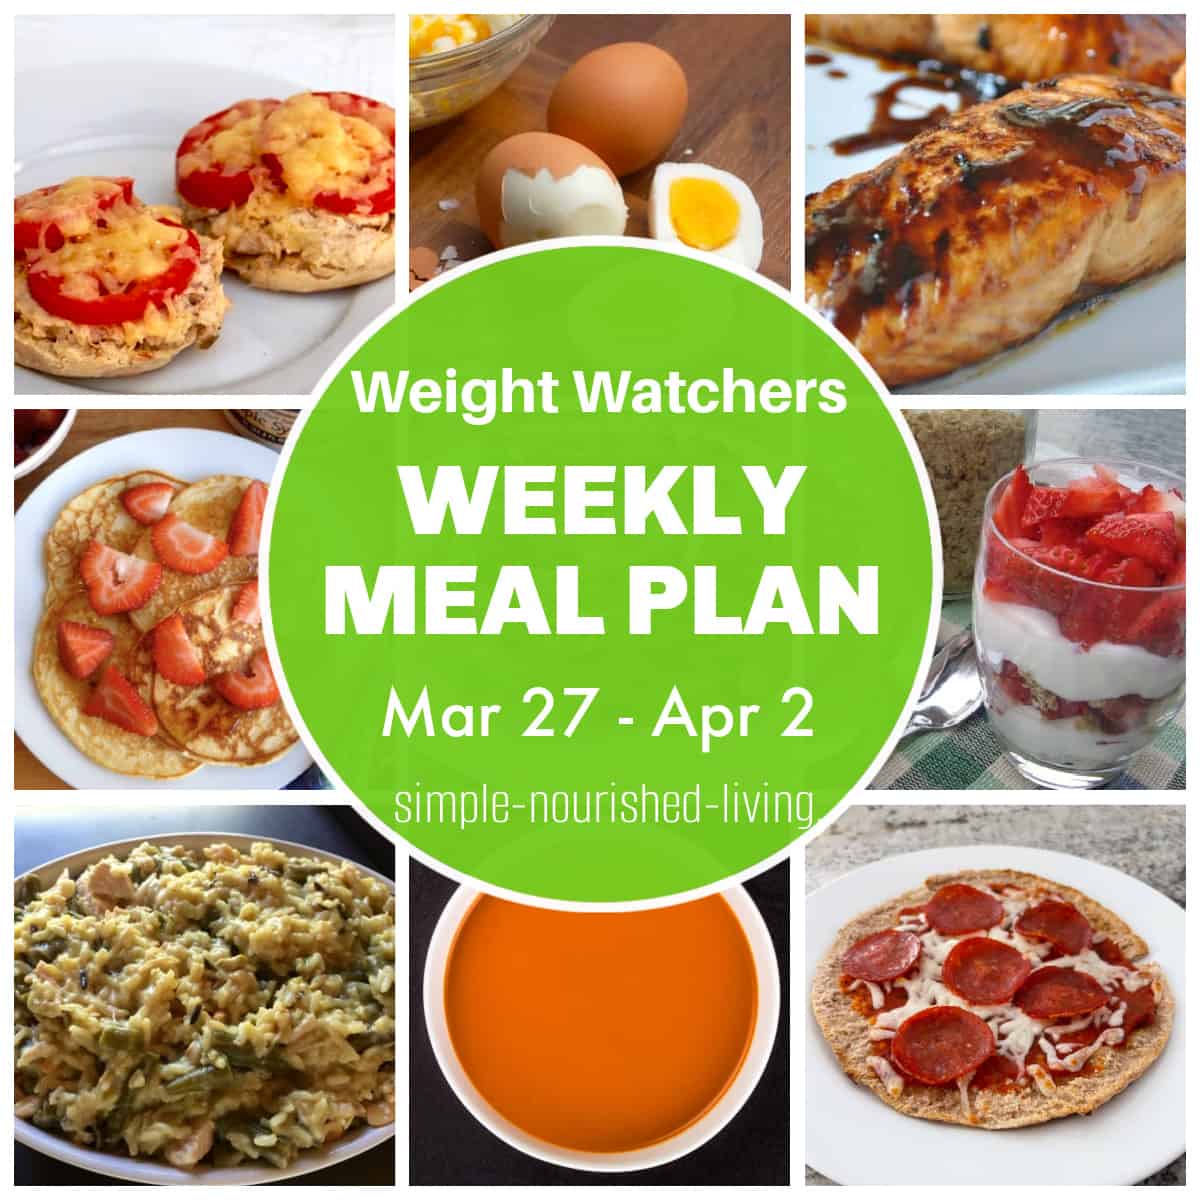 9 frame food collage with english muffin tuna melts, hard boiled eggs, glazed salmon fillet, cottage cheese pancakes topped with strawberries, strawberry yogurt partait, chicken rice casserole, tomato soup, pepperoni pita pizza with round green text box: Weight Watchers Weekly Meal Plan Mar 27 - Apr 2